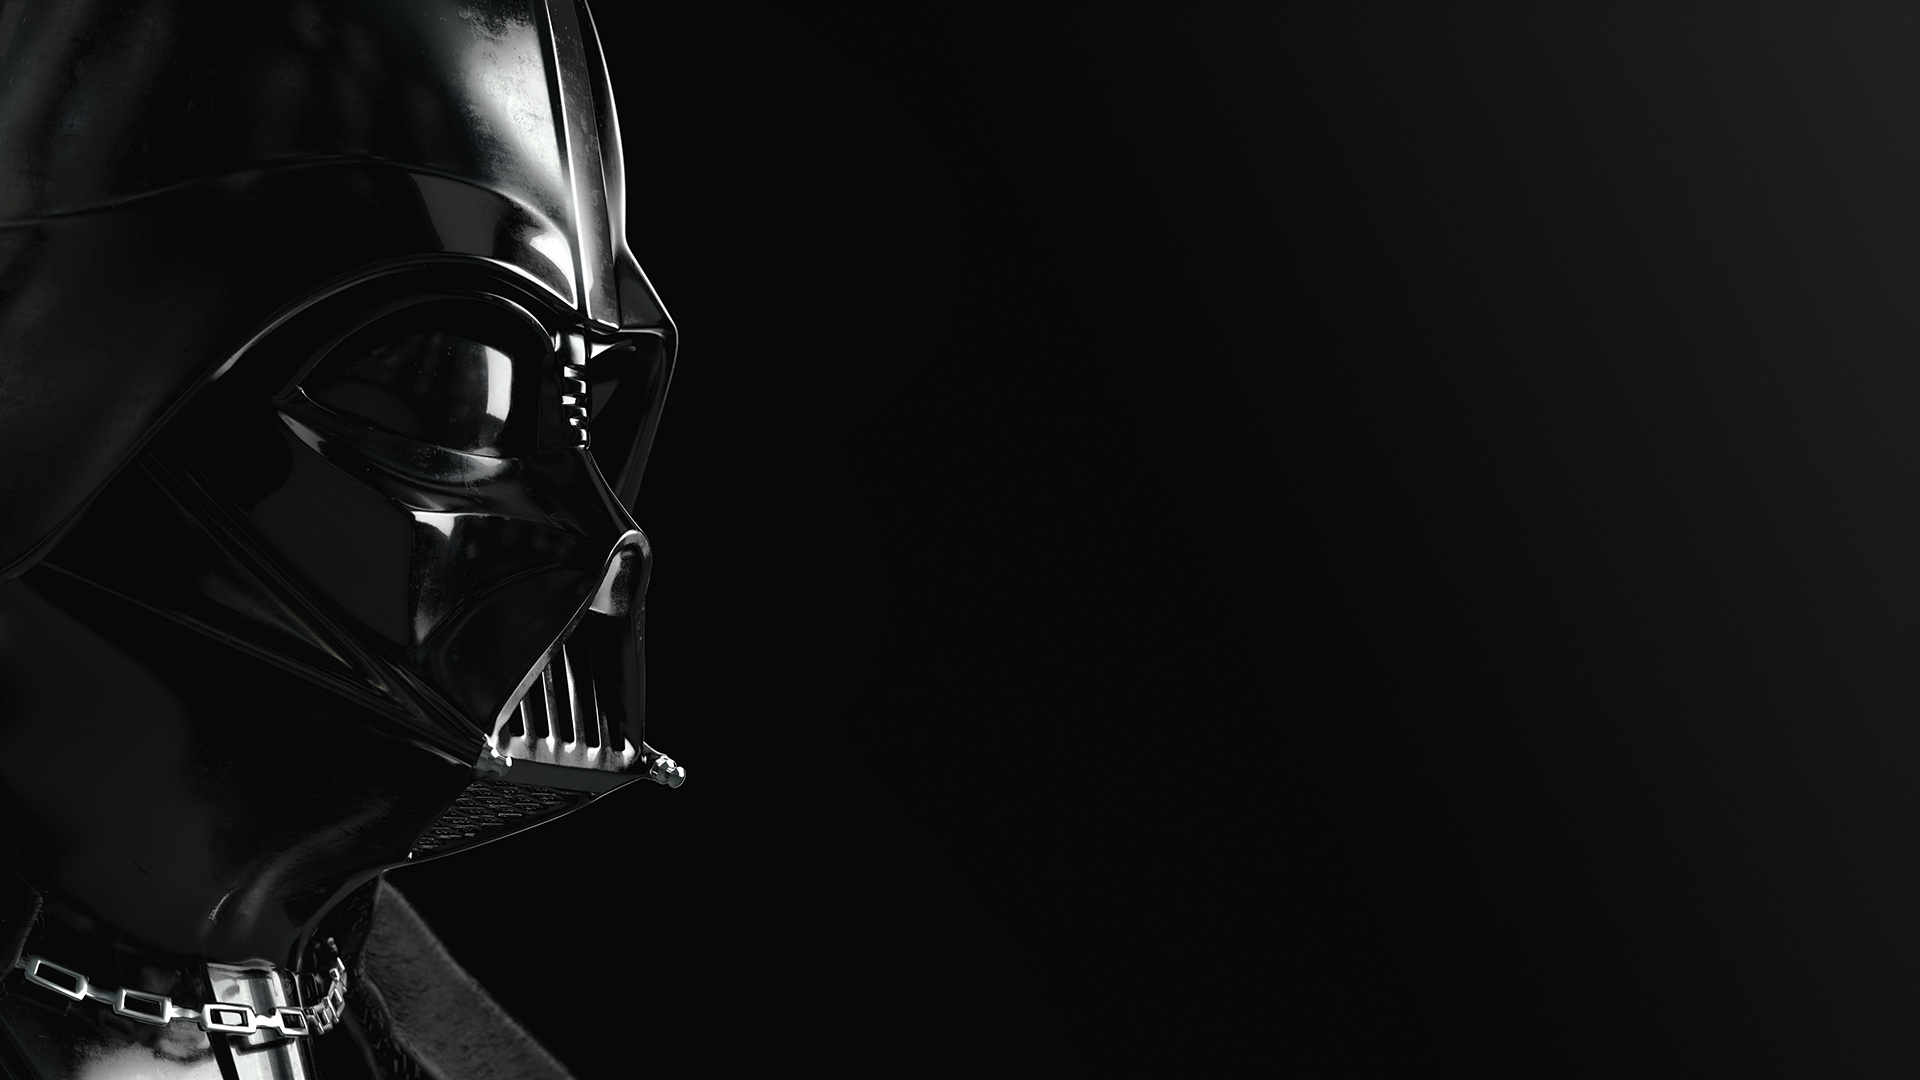 Darth Vader: Played a key role in the fall of the Galactic Republic and the rise of the Galactic Empire. 1920x1080 Full HD Background.